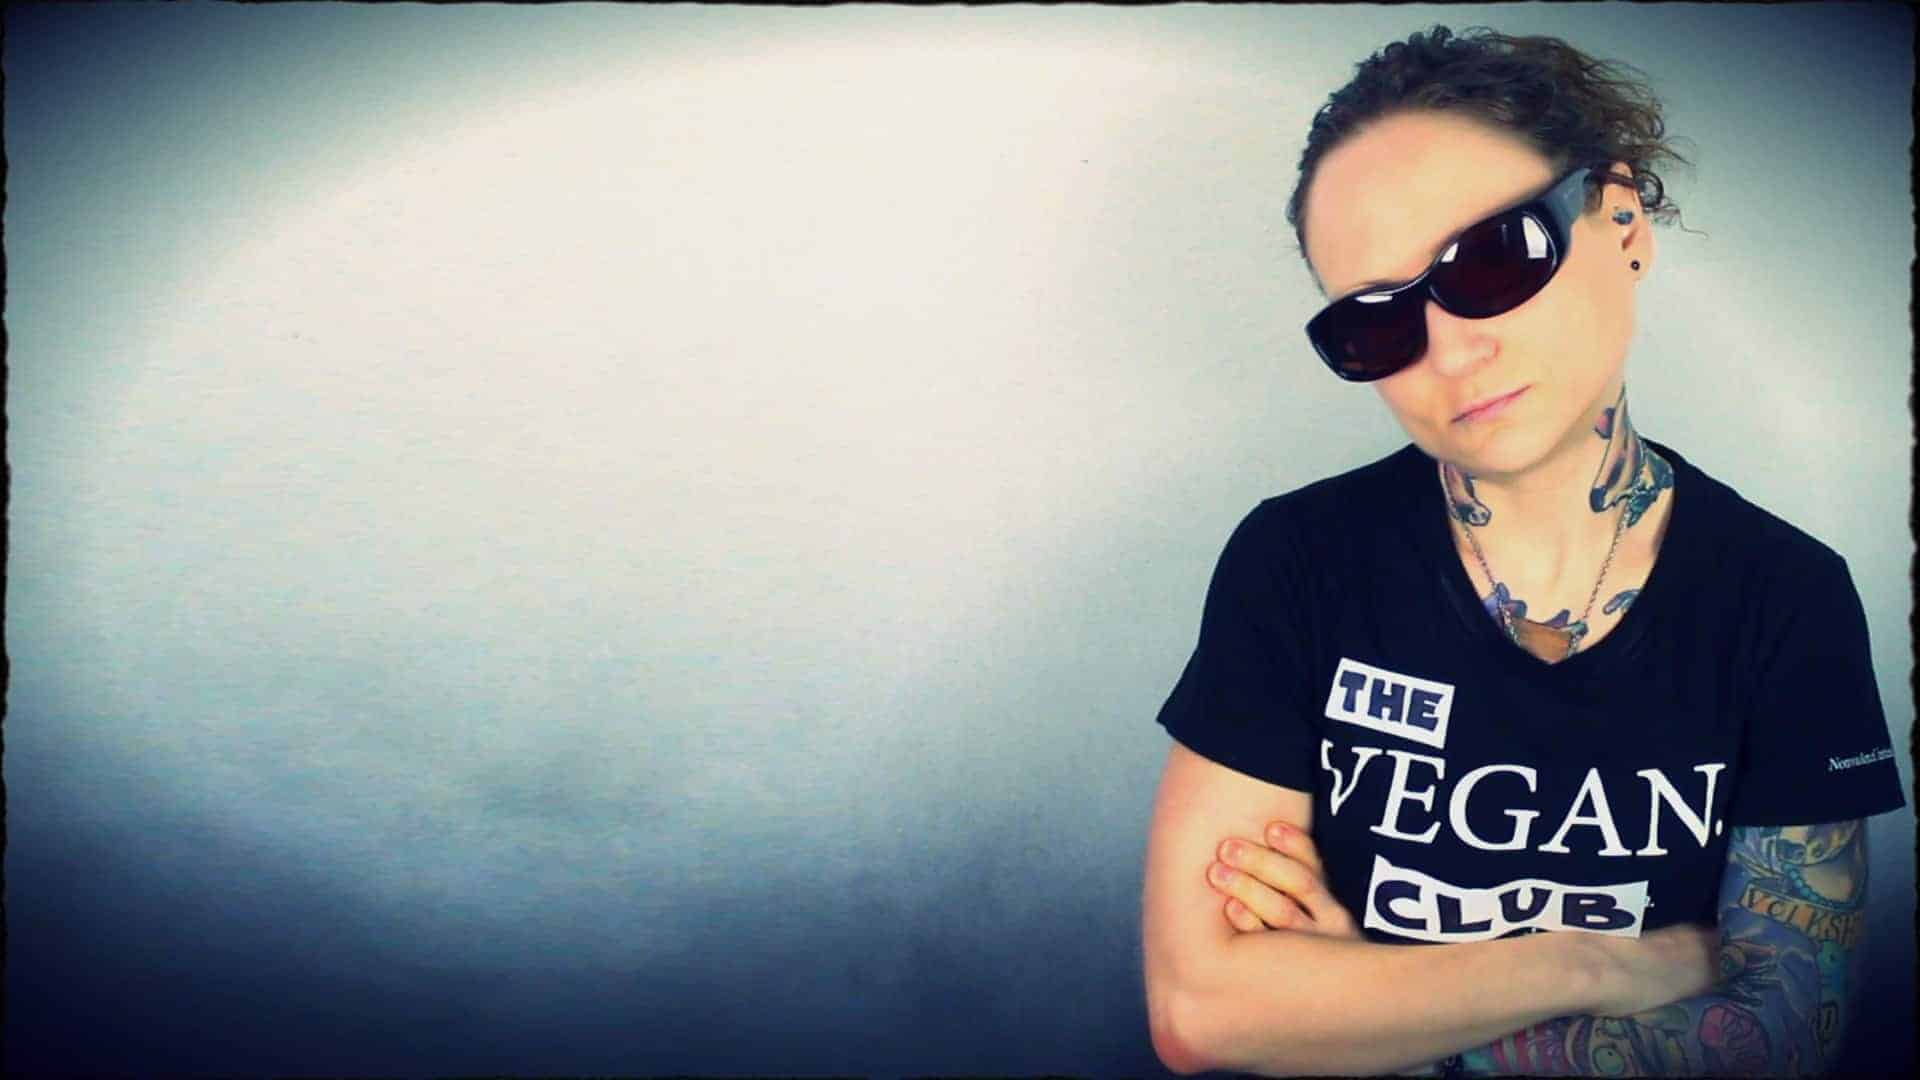 Emily Moran Barwick of Bite Size Vegan is shown in a dark tee-shirt and shades. Her tee-shirt says “The vegan club”. Emily’s head is tilted to one side and a look of intimidation is upon her face.